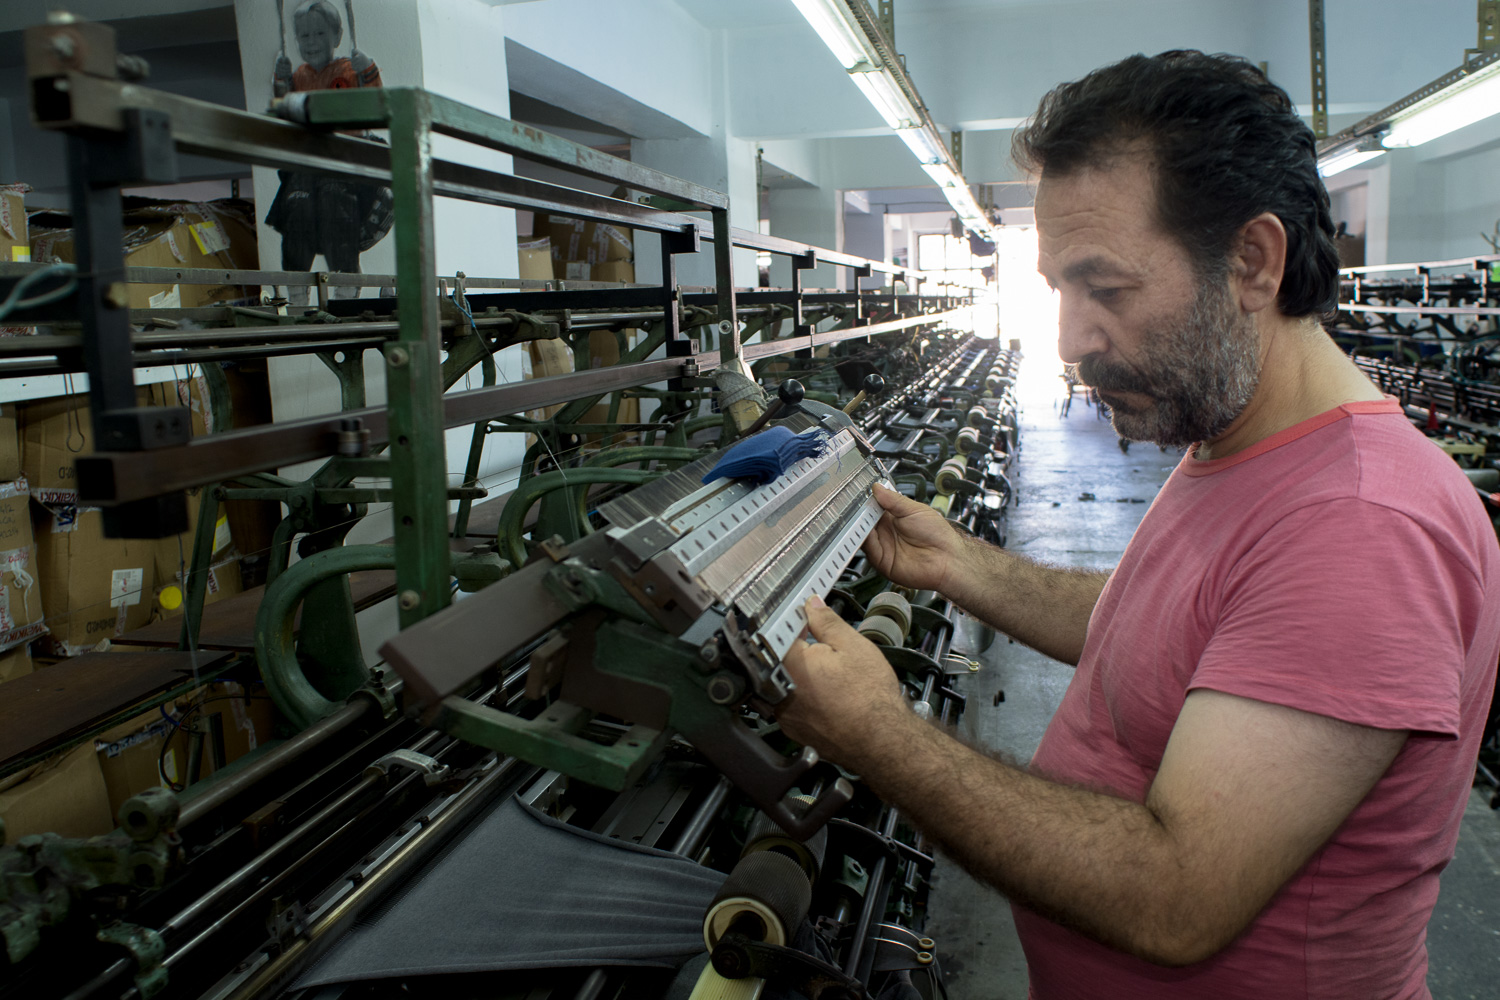 Research on Syrian refugees in Turkey's garment sector